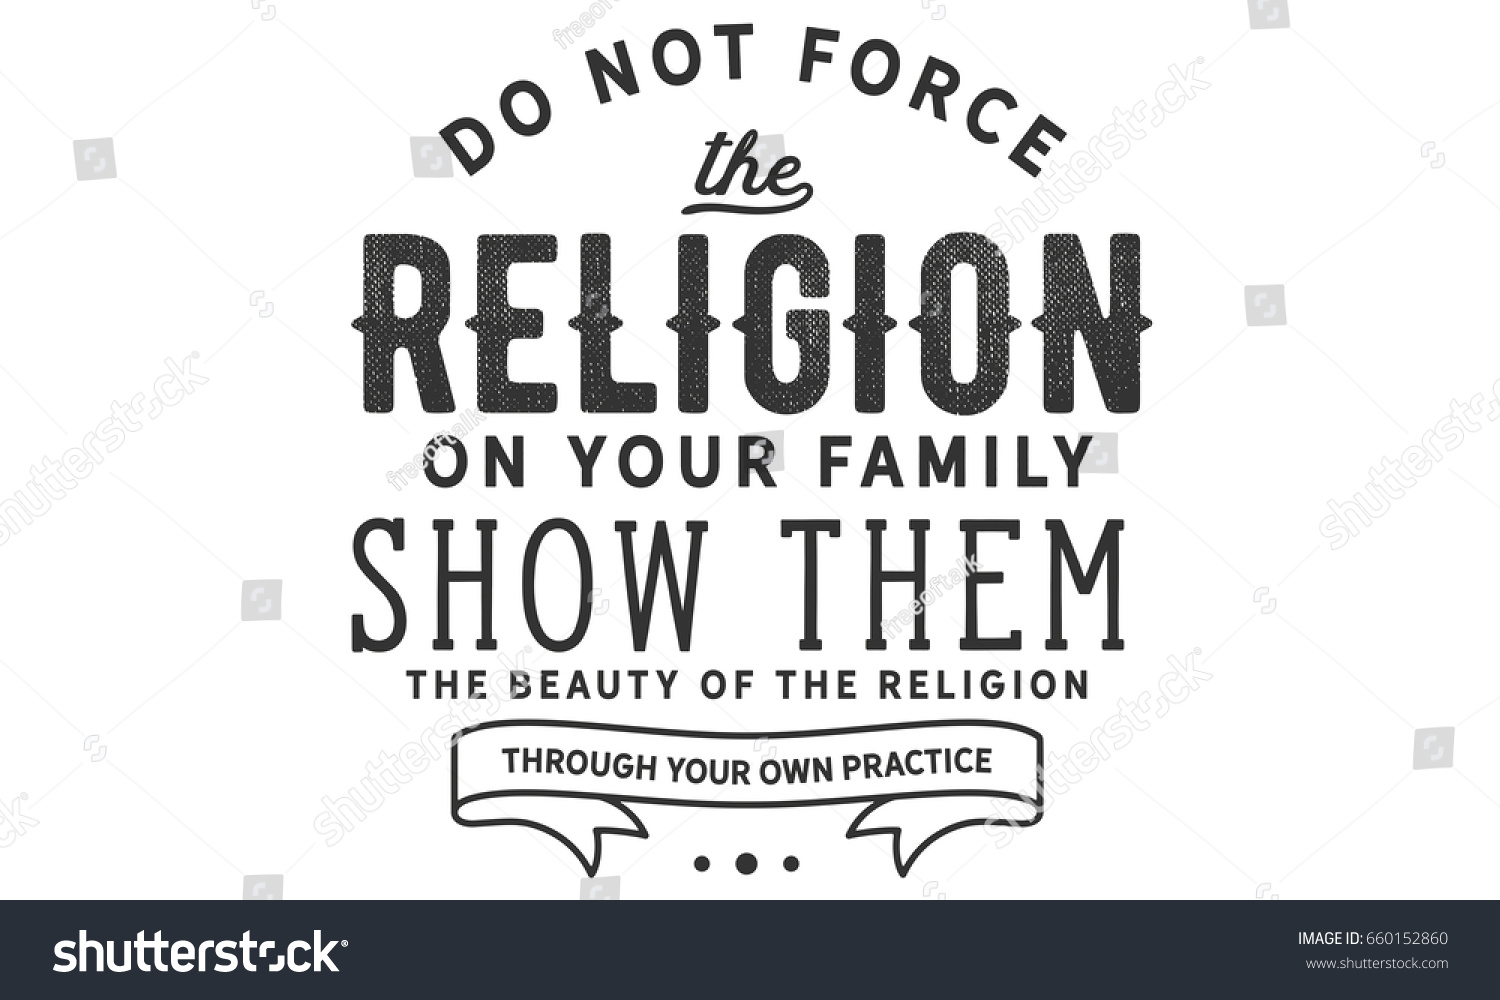 Do not force the religion on your family. show them the beauty of the religion through your own practice. #660152860